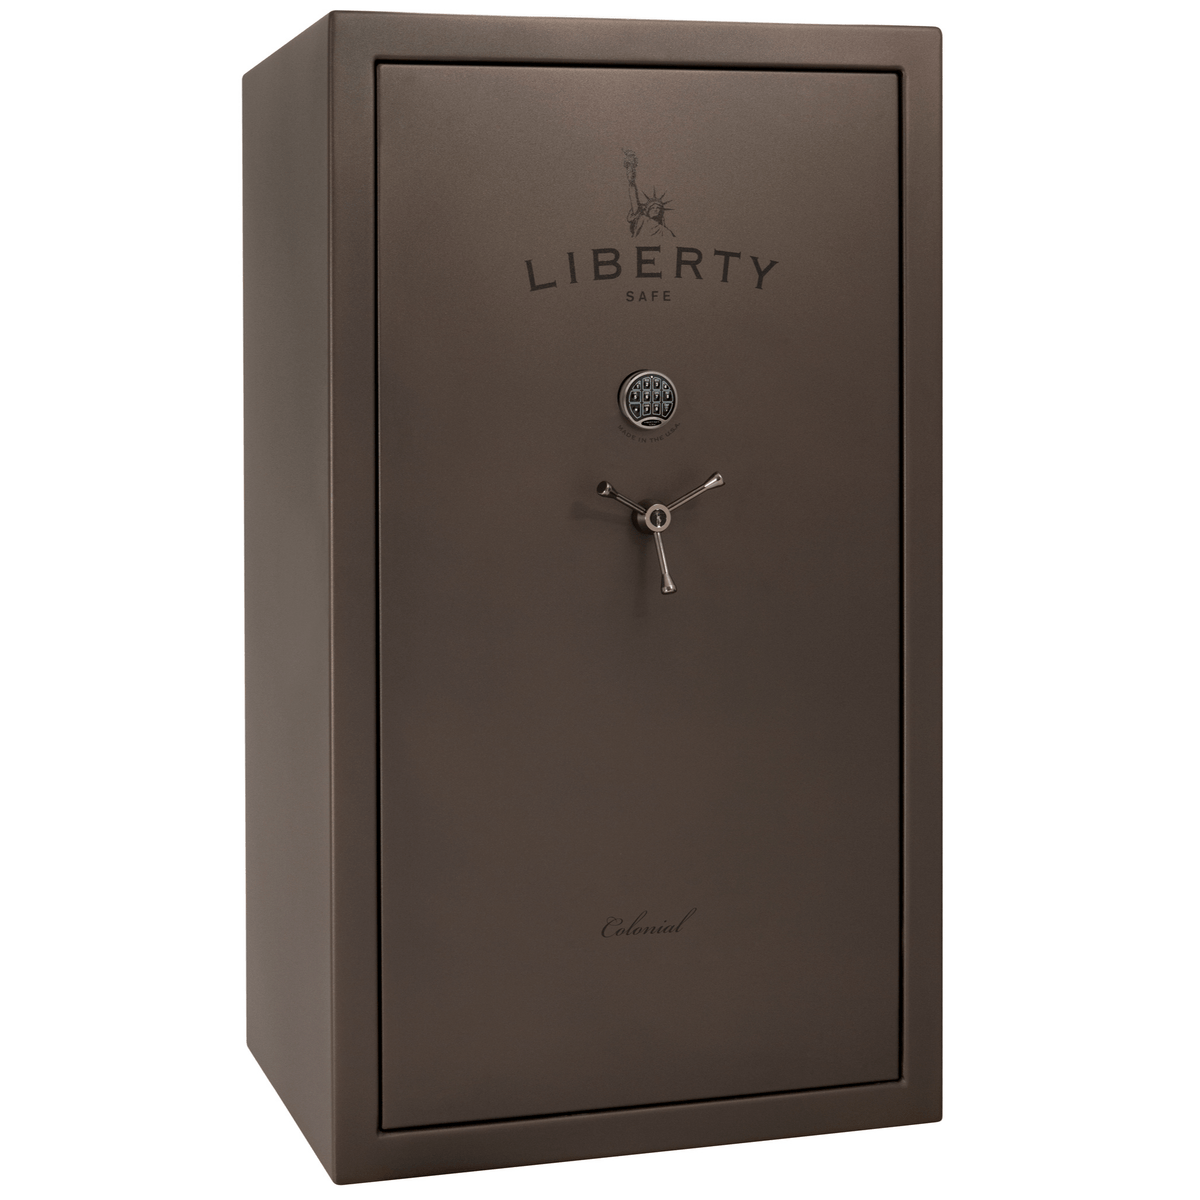 Liberty Colonial 50 Safe in Textured Bronze with Black Chrome Electronic Lock.